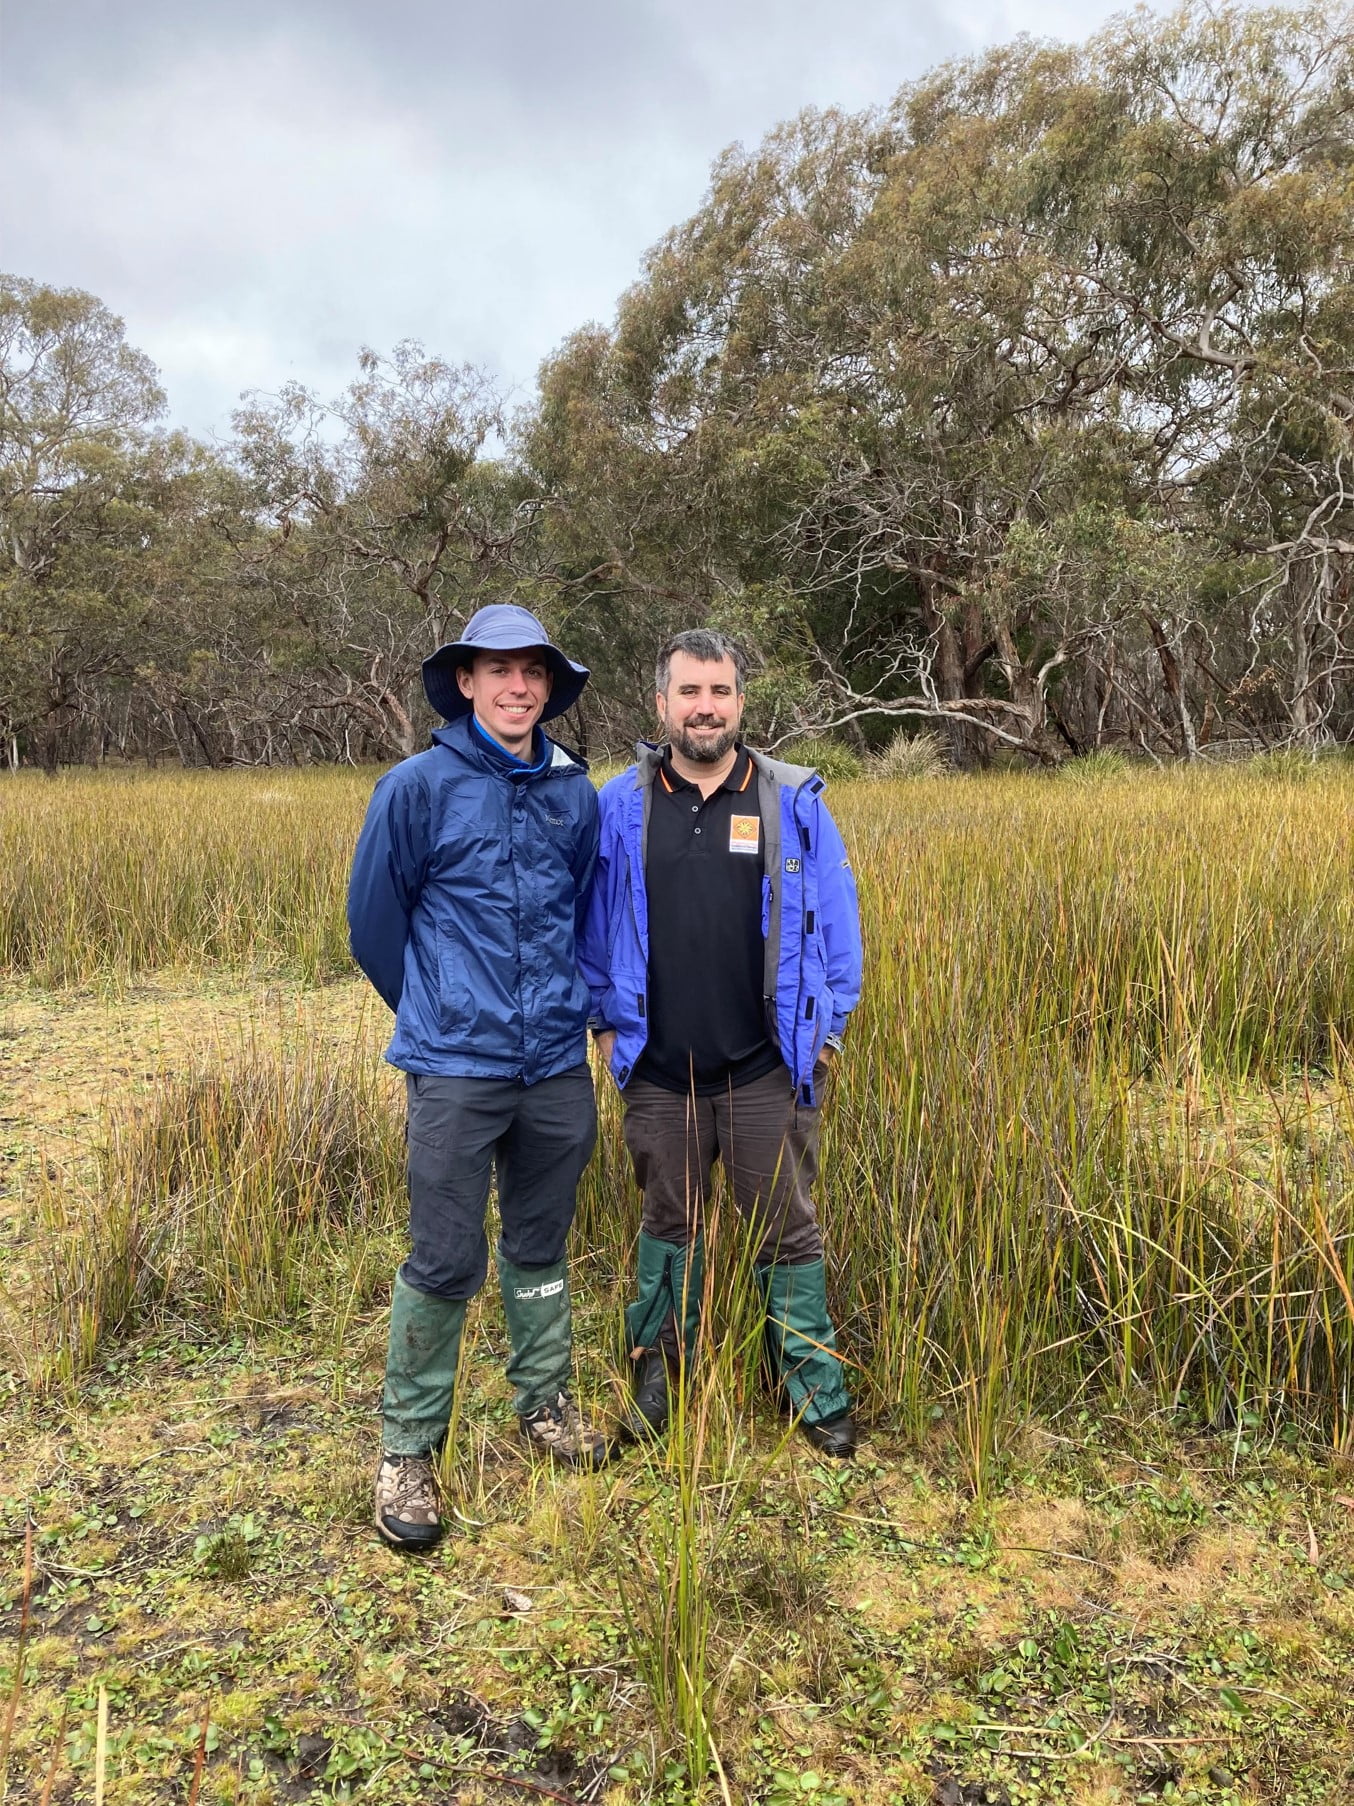 Callum and Jayden stand side-by-side at a a wetland near Stony Creek Reservoir (approx. 40km from the nearest estuary) which was going to be watered from the nearby reservoir for the first time.